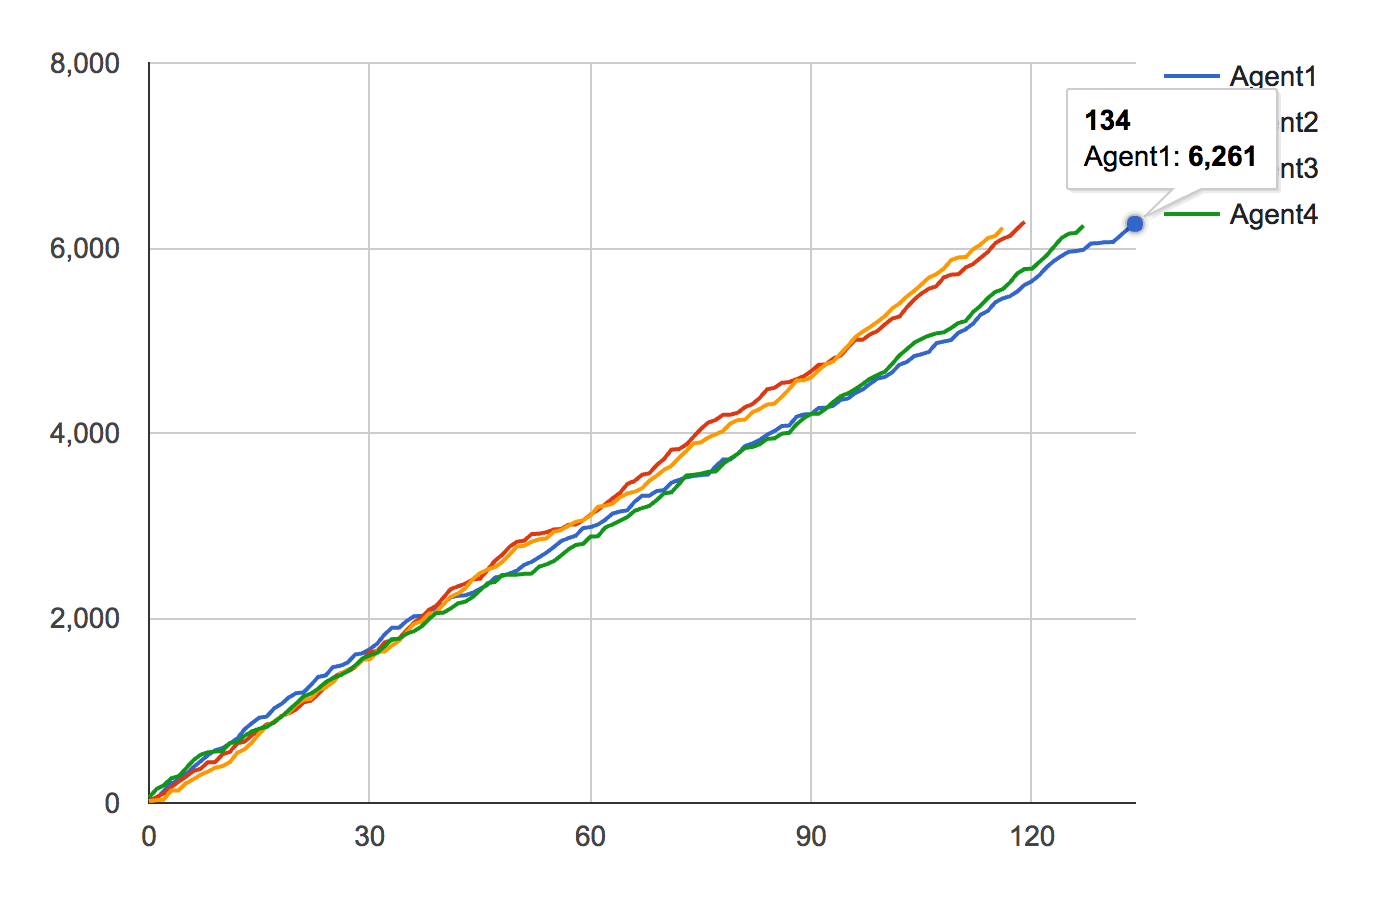 Figure 7: Cumulative job time by number of agents, per agent. Comparing to Figure 6, you can see that Agent1 ran far more jobs, 134 in total, but that the total time was approximately the same, at 6261s. 